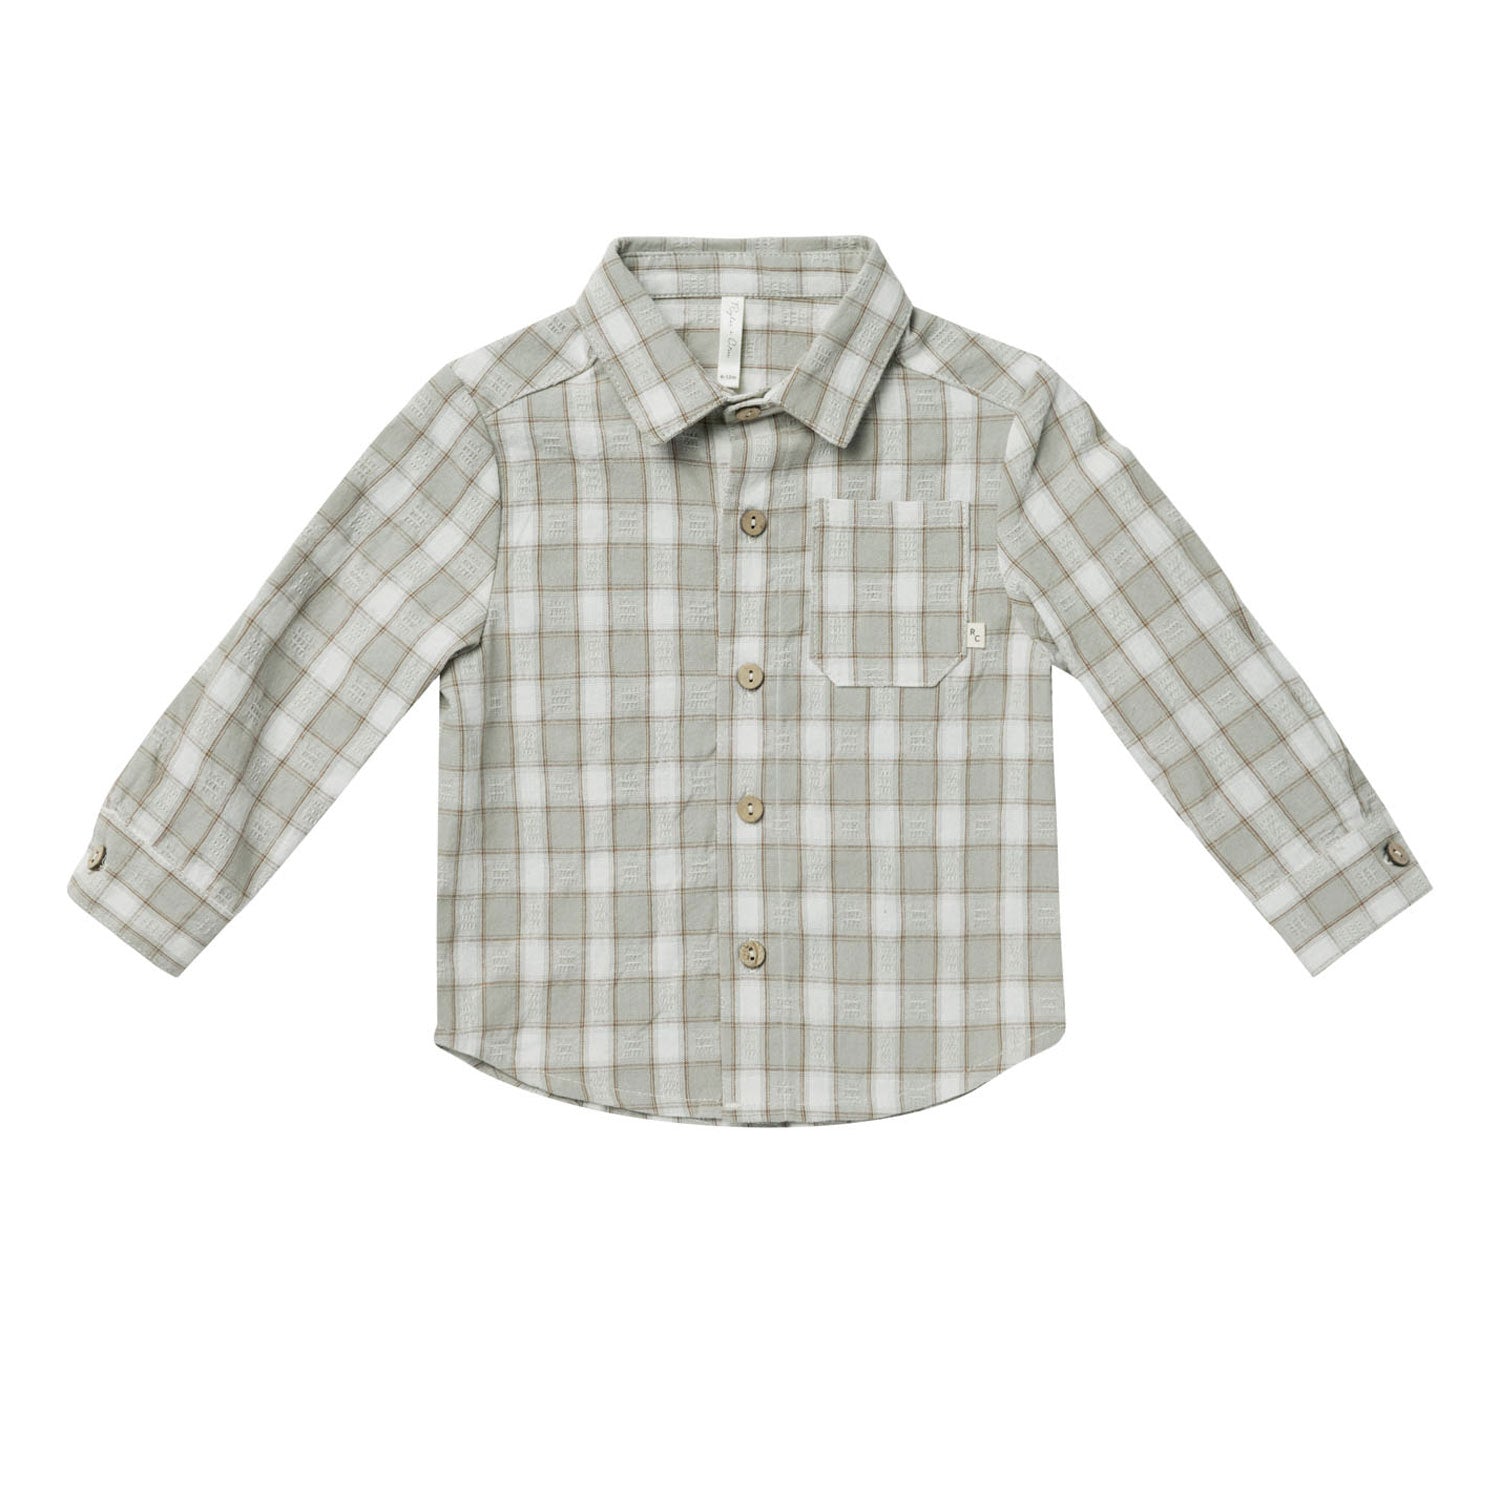 Rylee and Cru Collared Shirt - Pewter Plaid